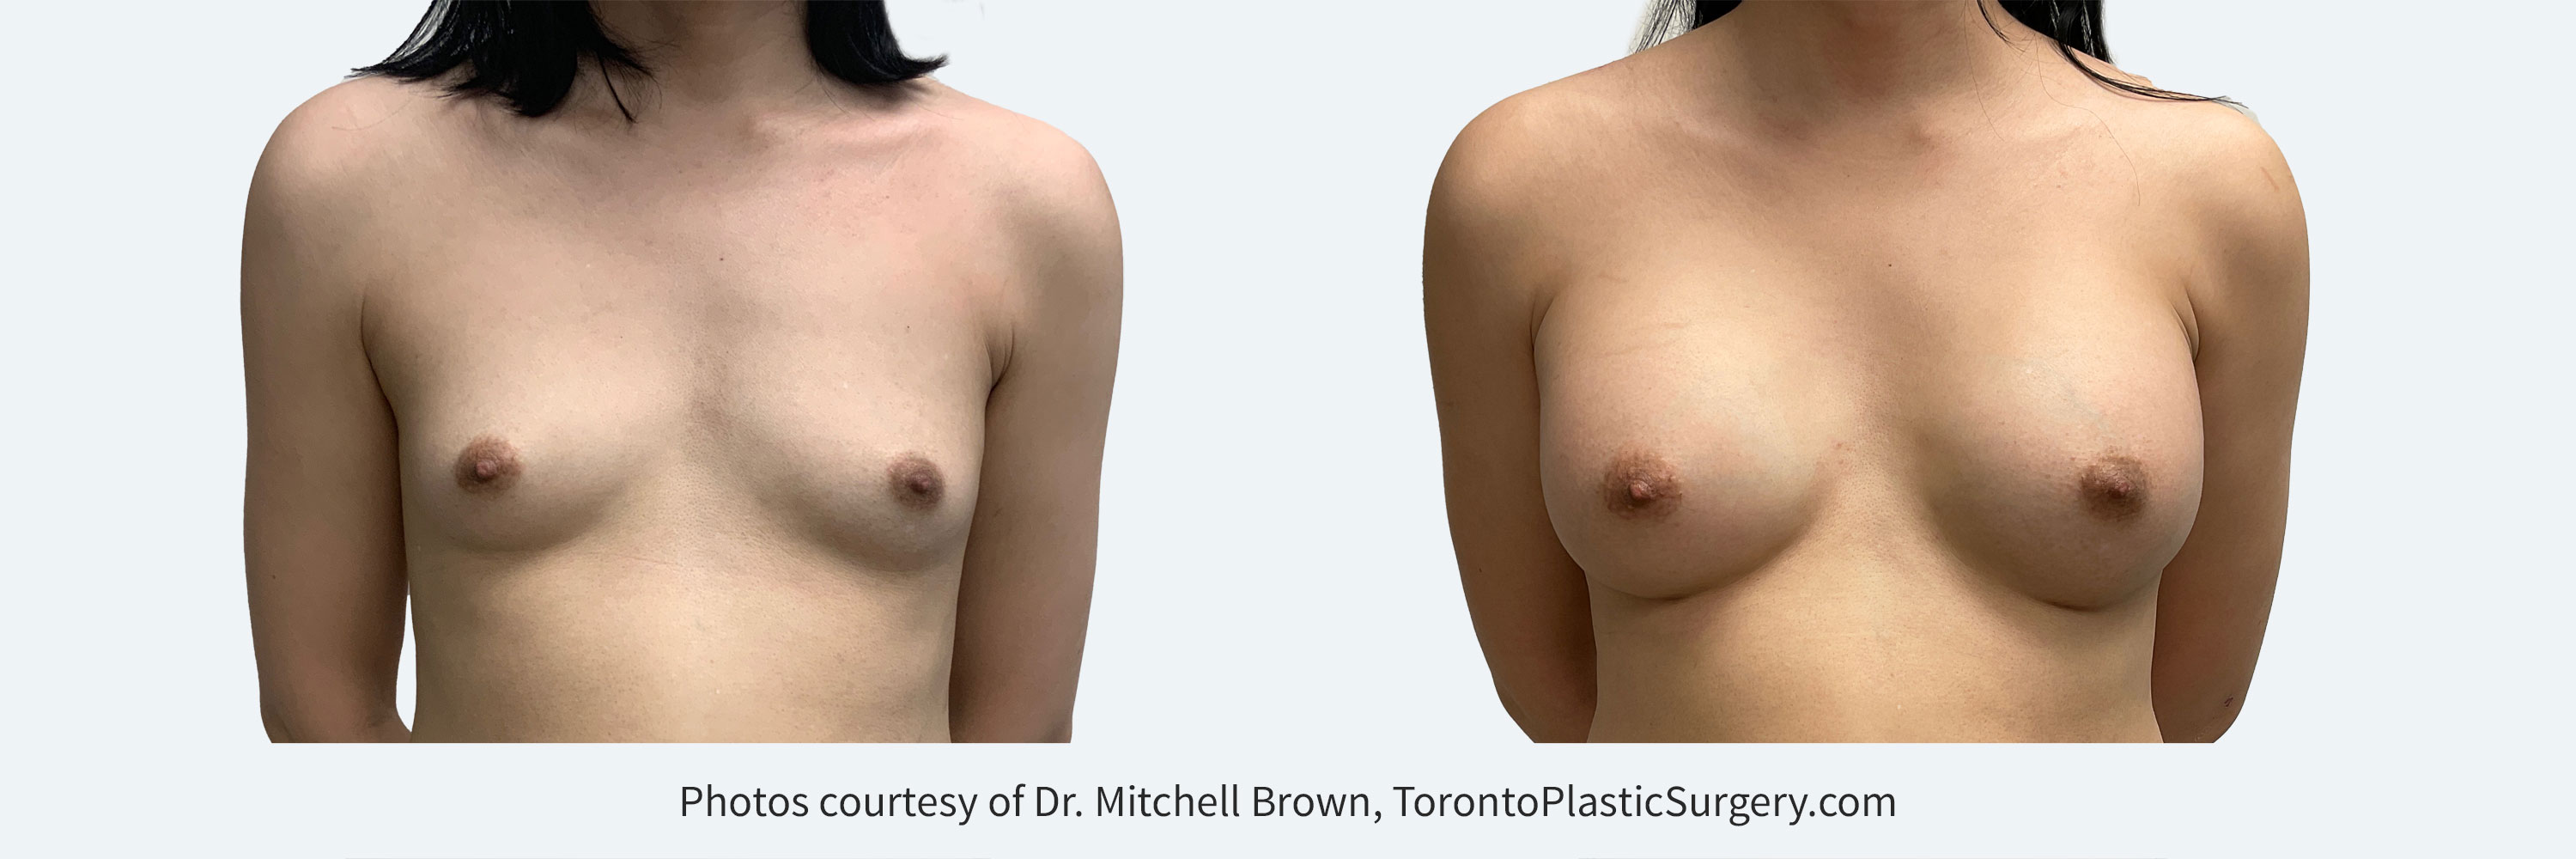 Transfemale Breast Augmentation with smooth round gel 450cc implants, Before and After 6 Months